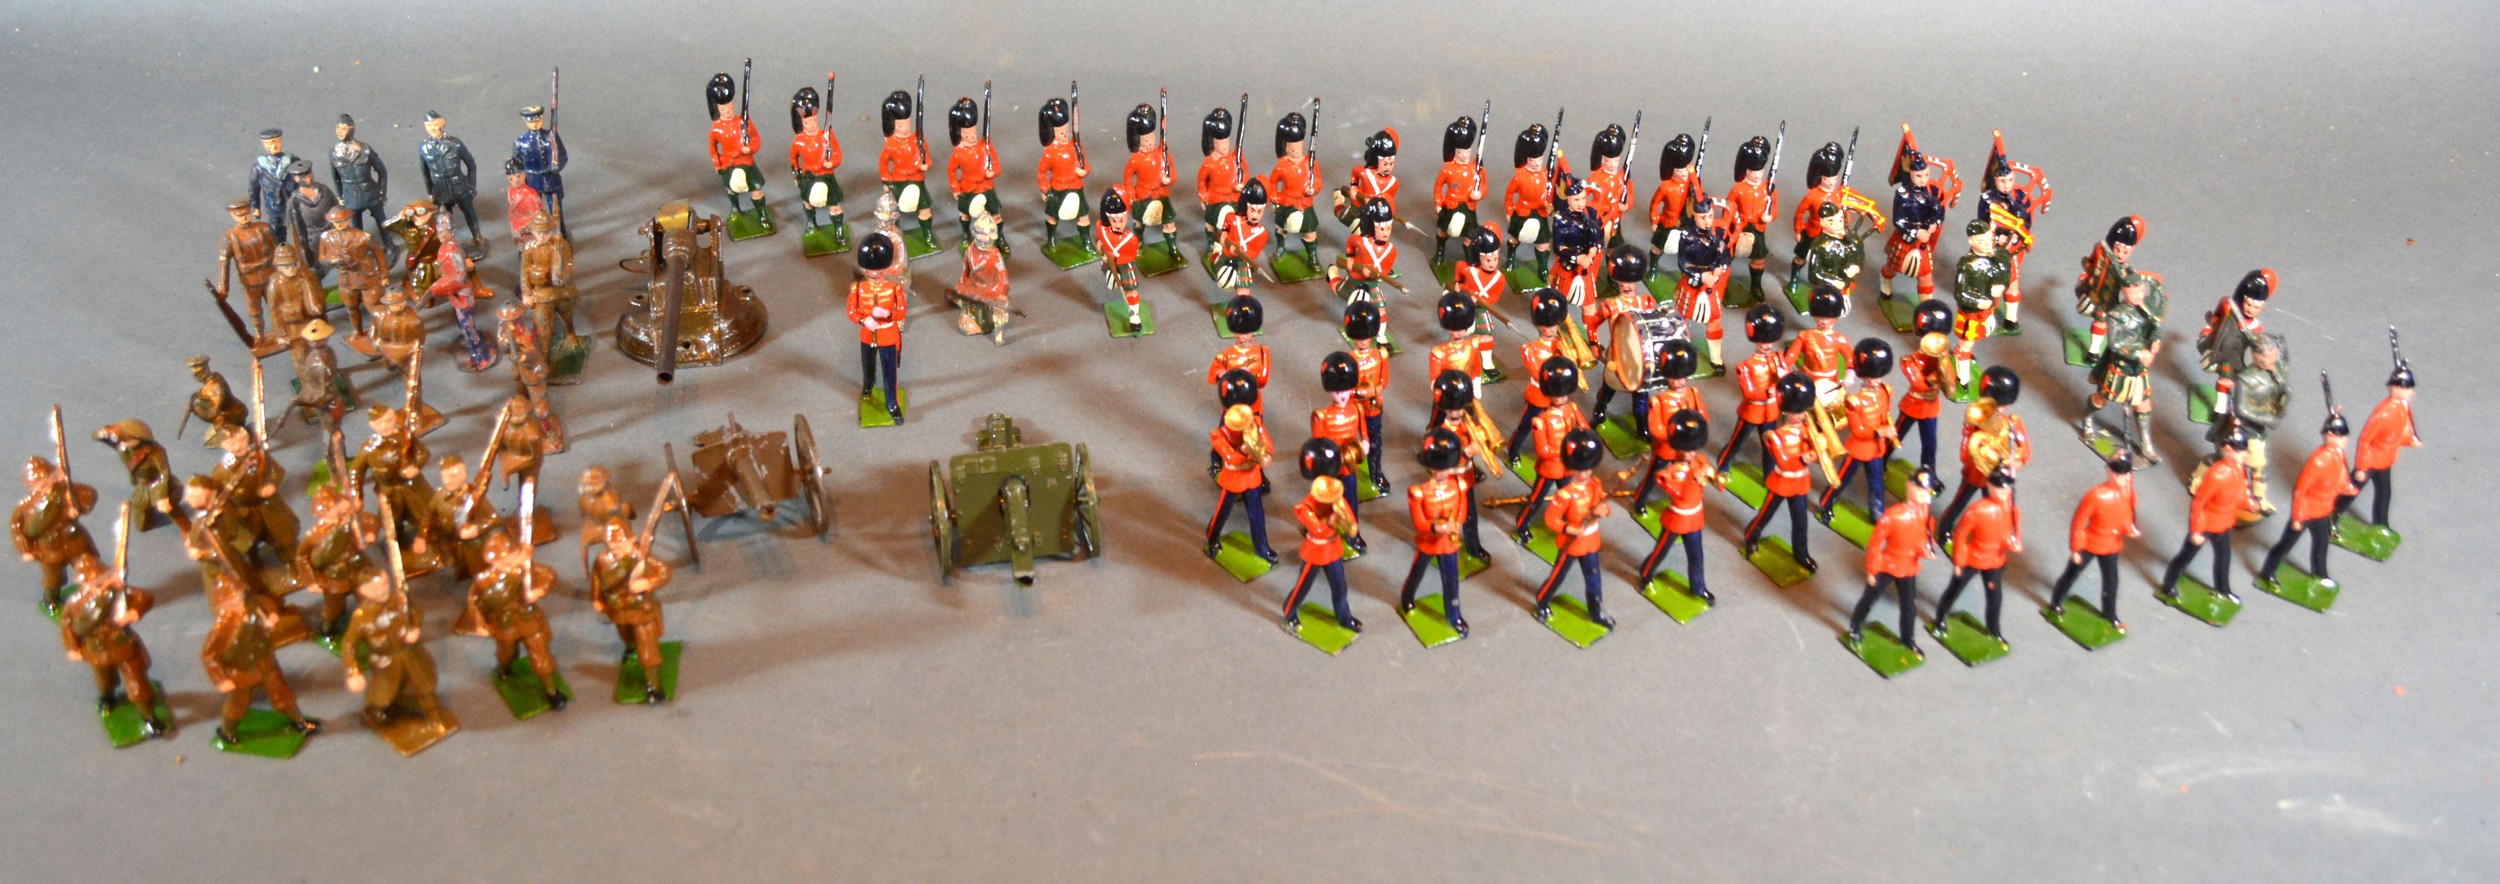 A Collection of Britain's Model Soldiers together with a collection of other painted model soldiers